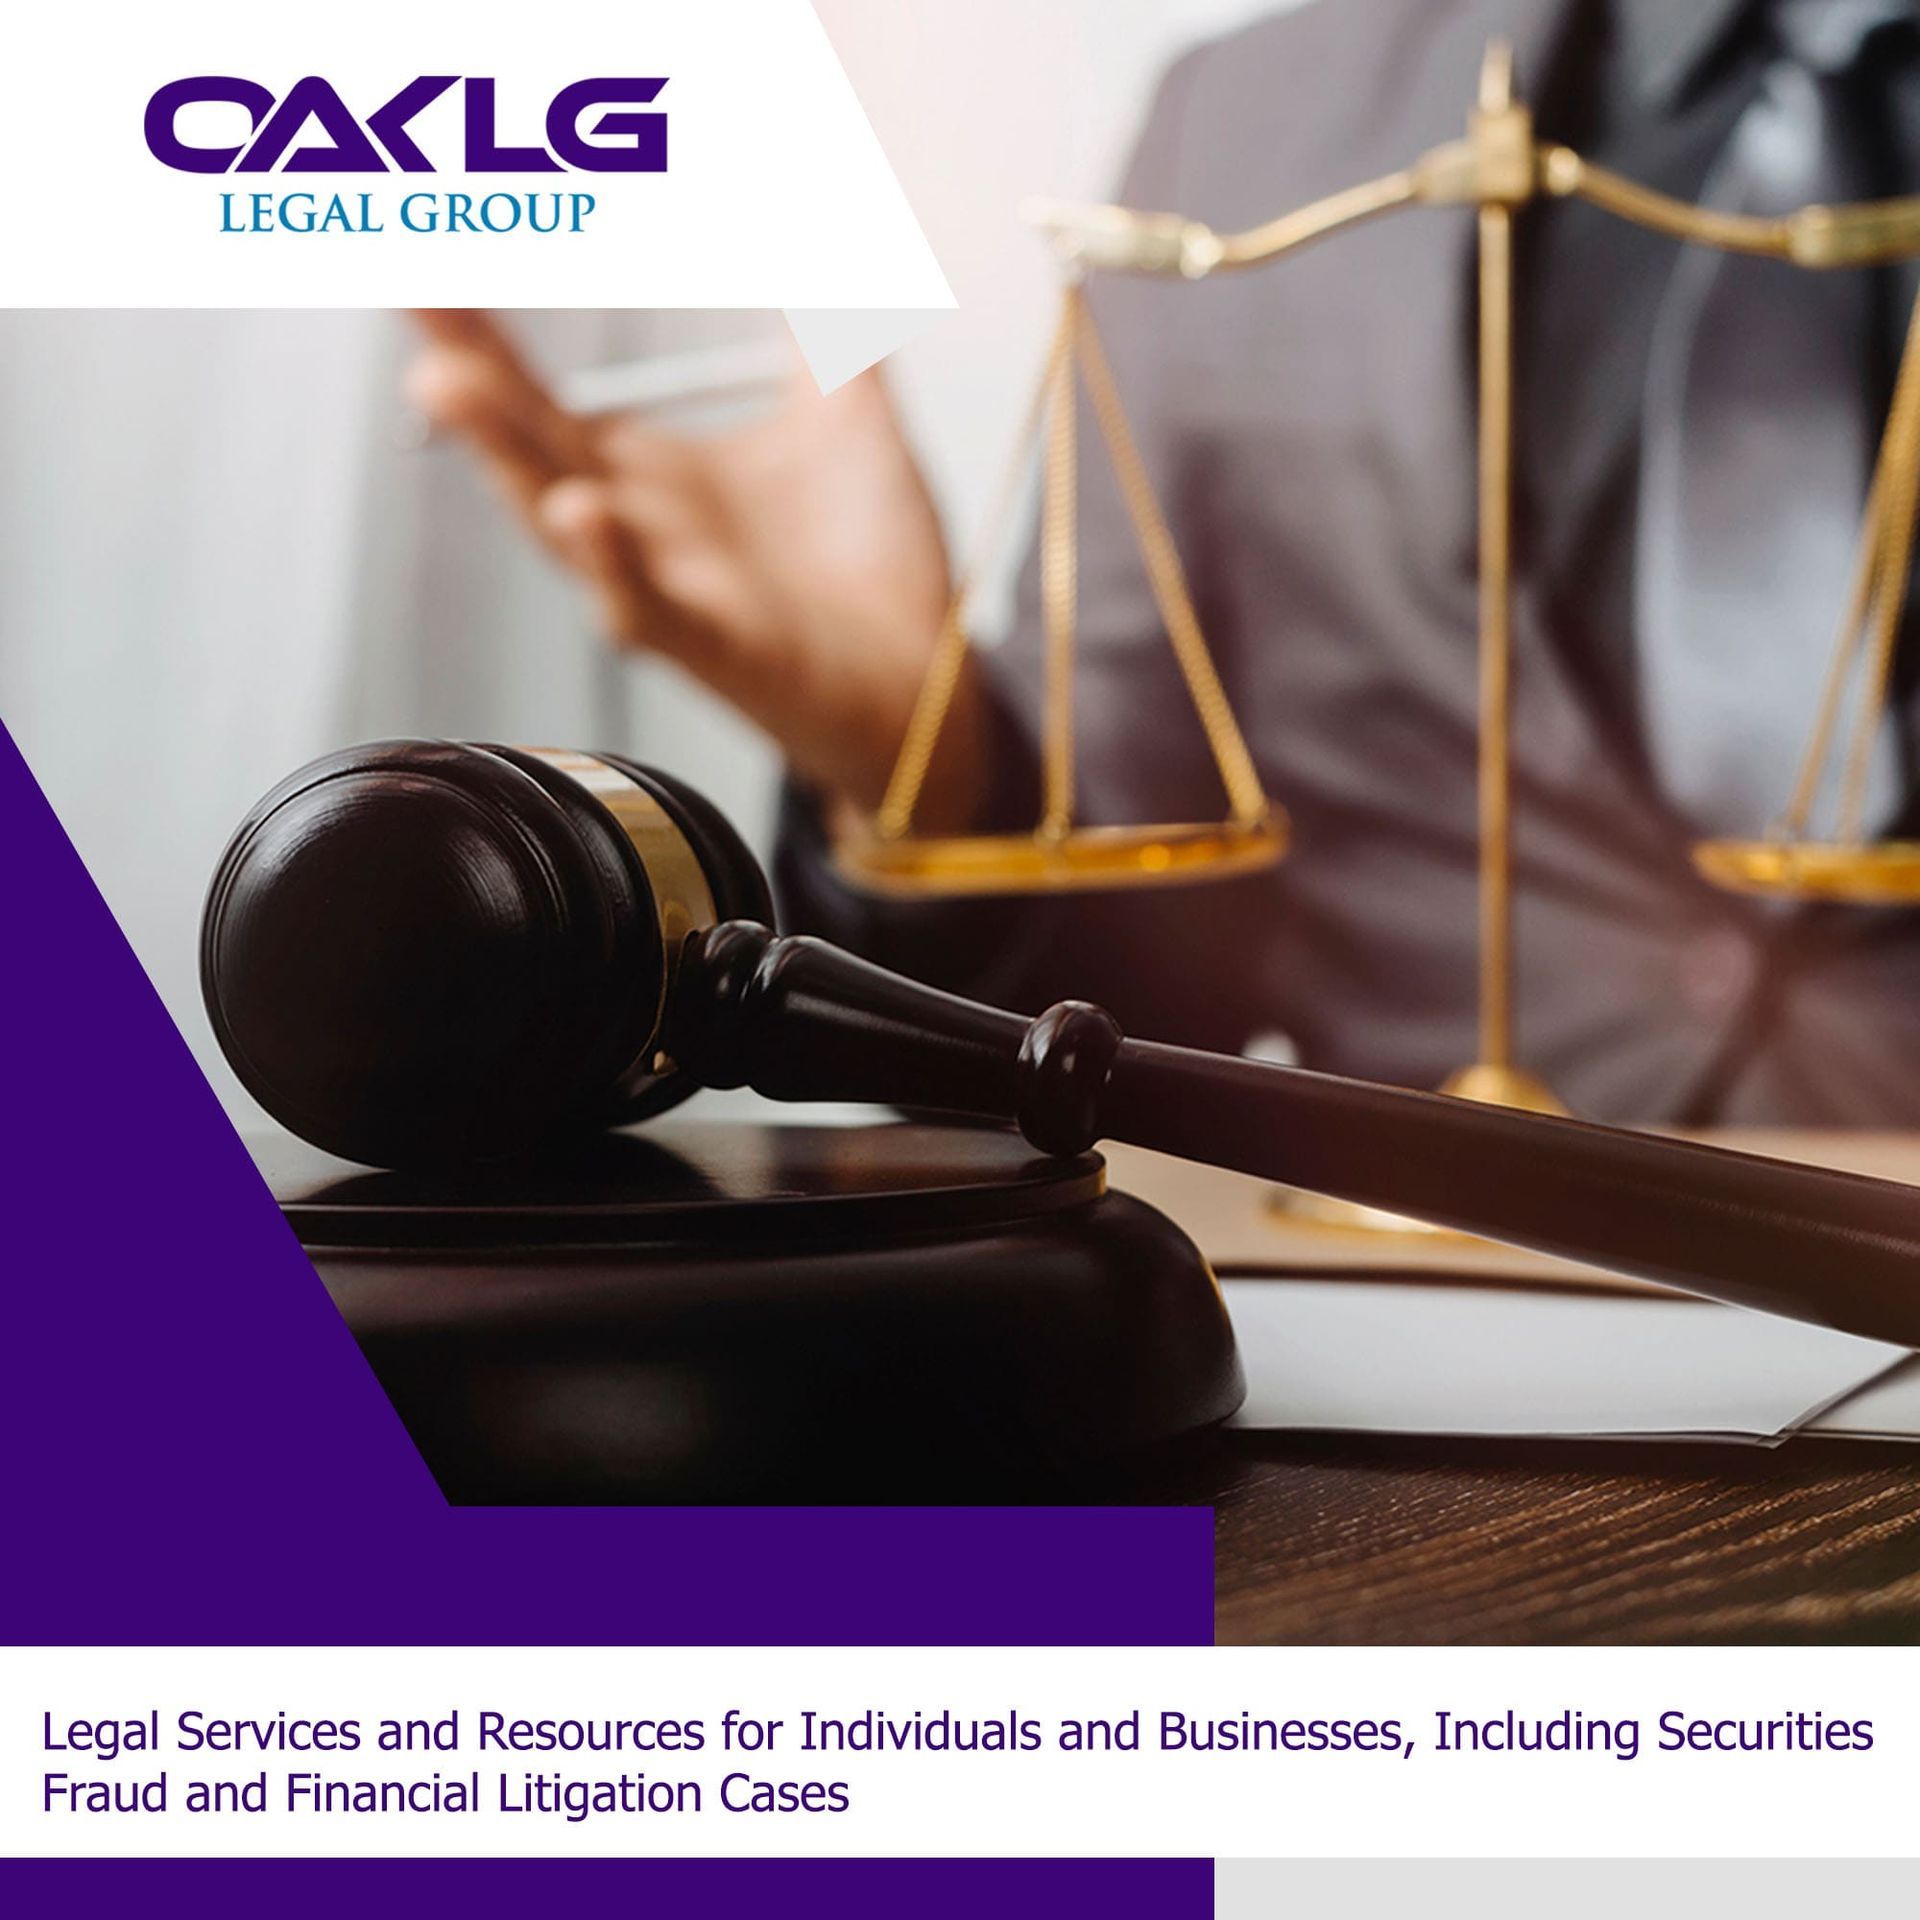 Seek compensation for financial loses due to securities fraud | OAKLG Legal Group